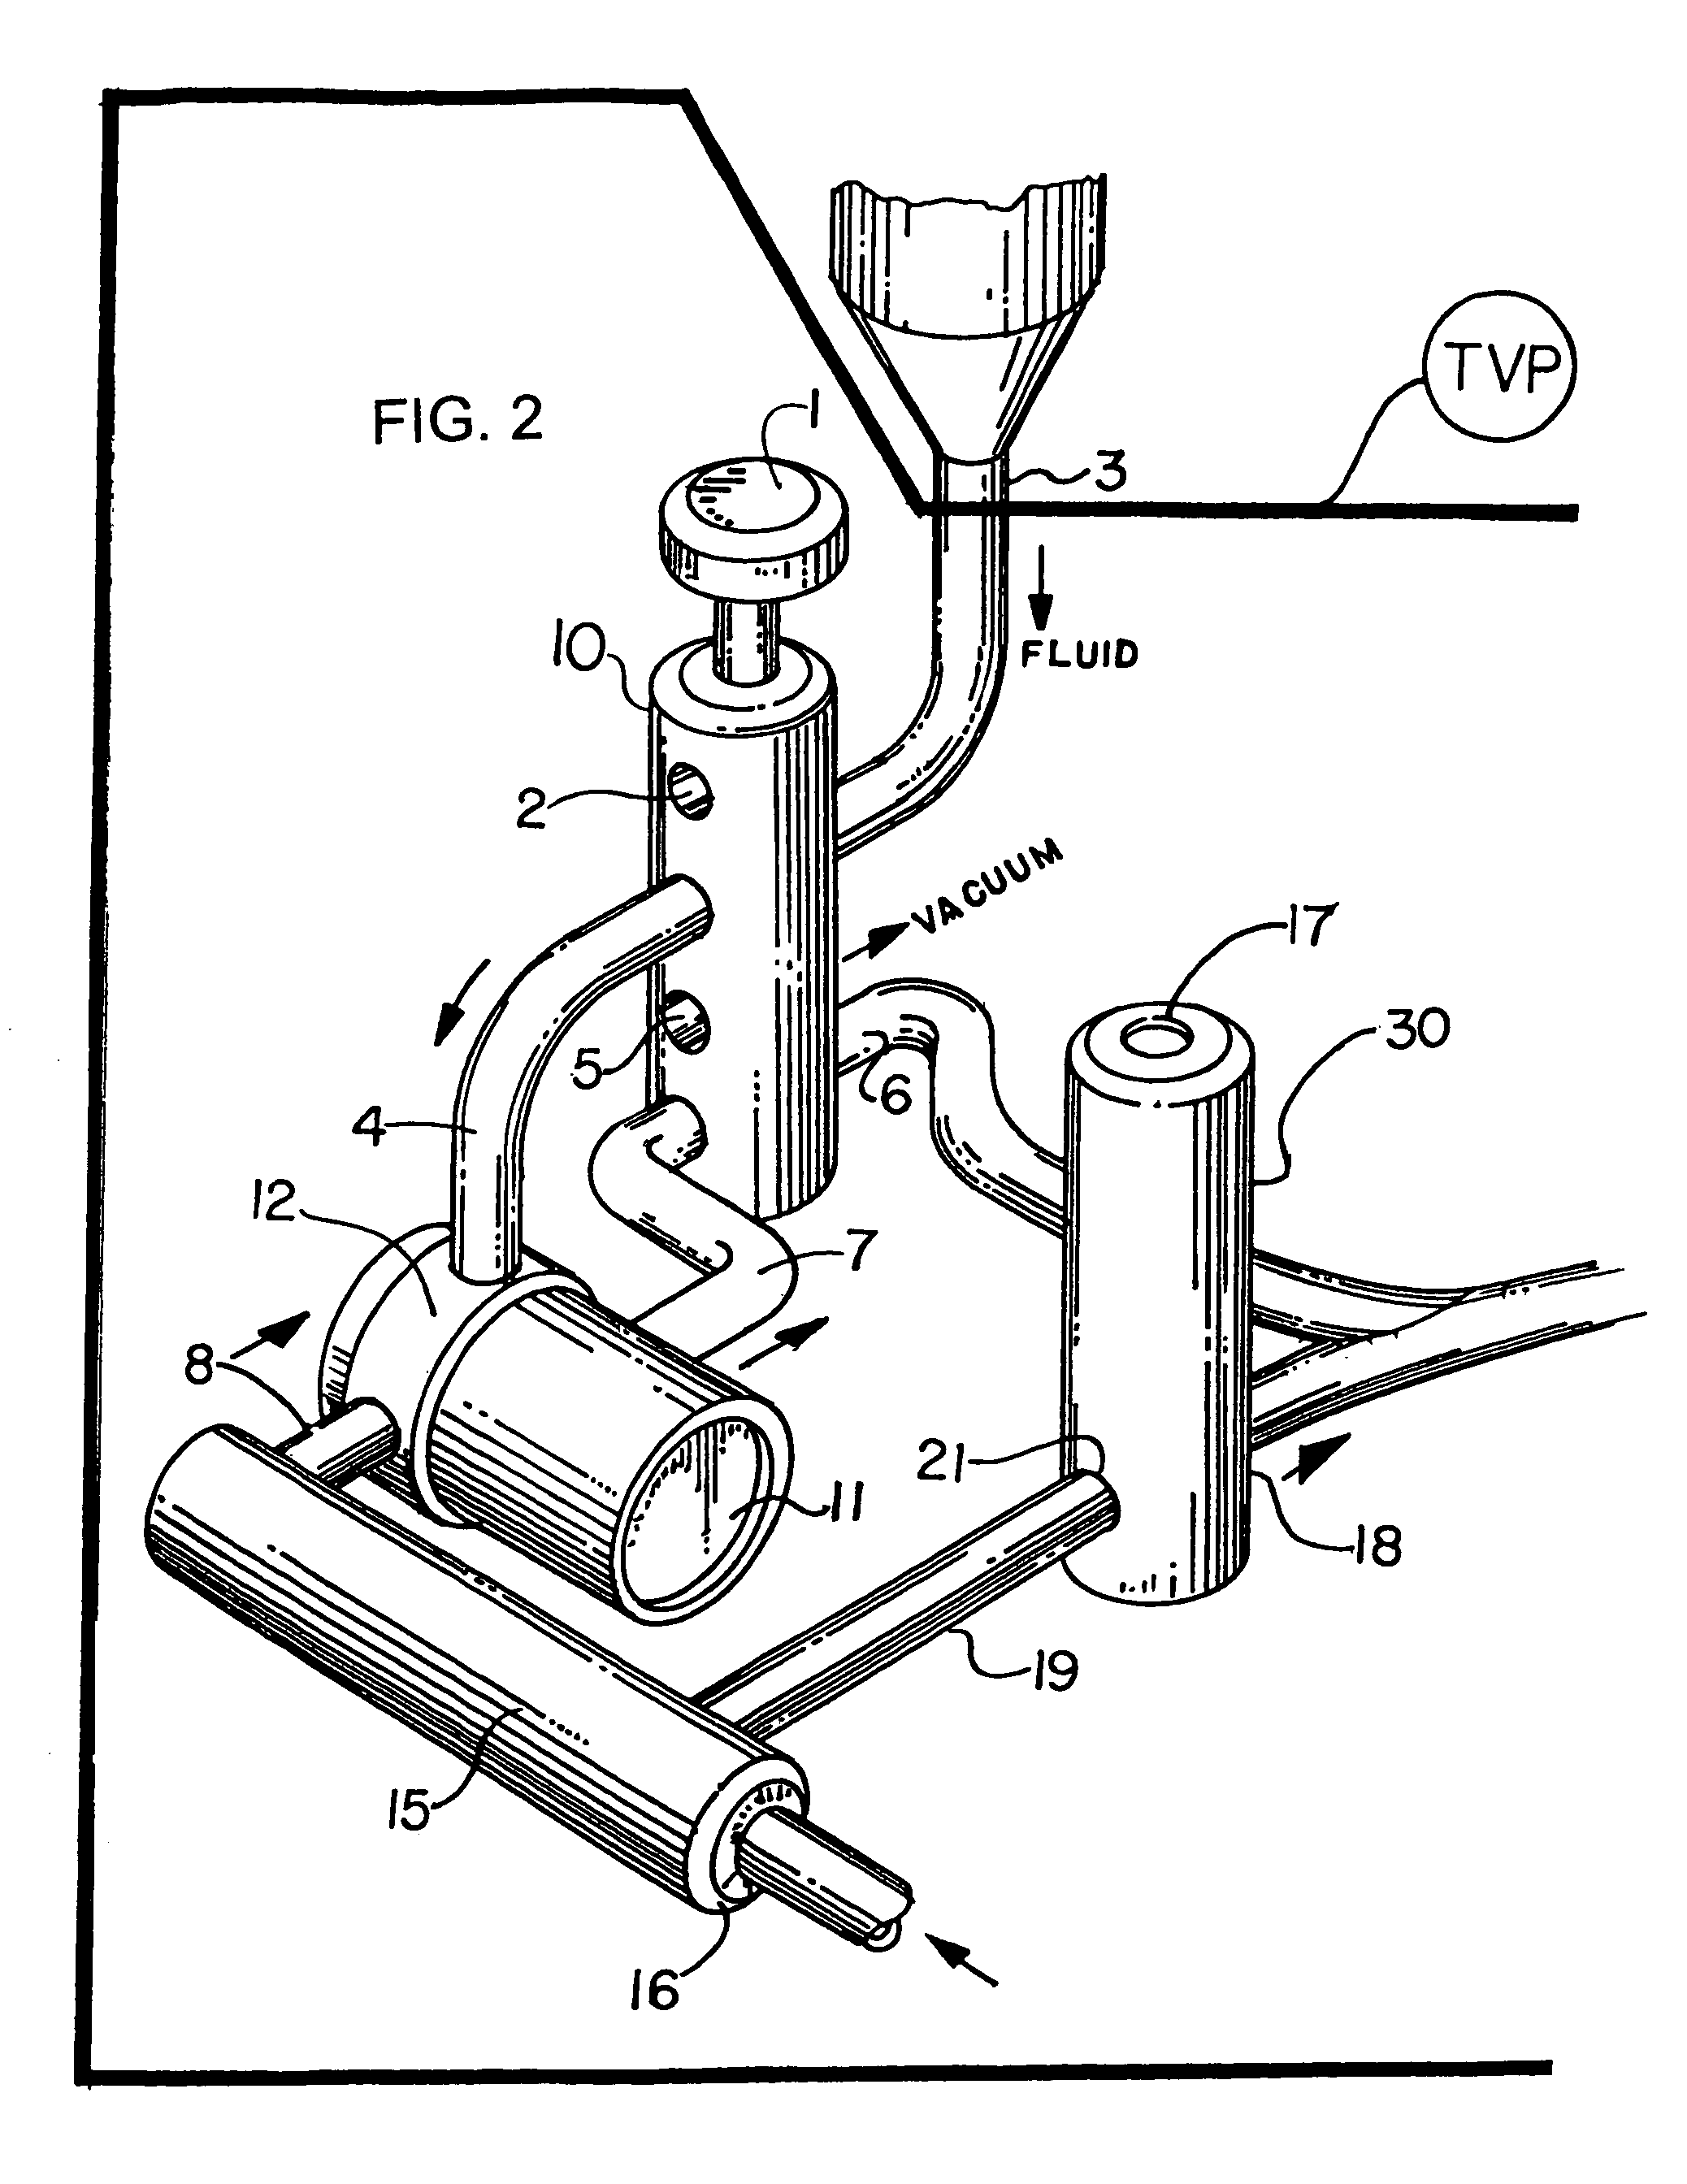 Methods and devices for pumping fluid and performing surgical procedures